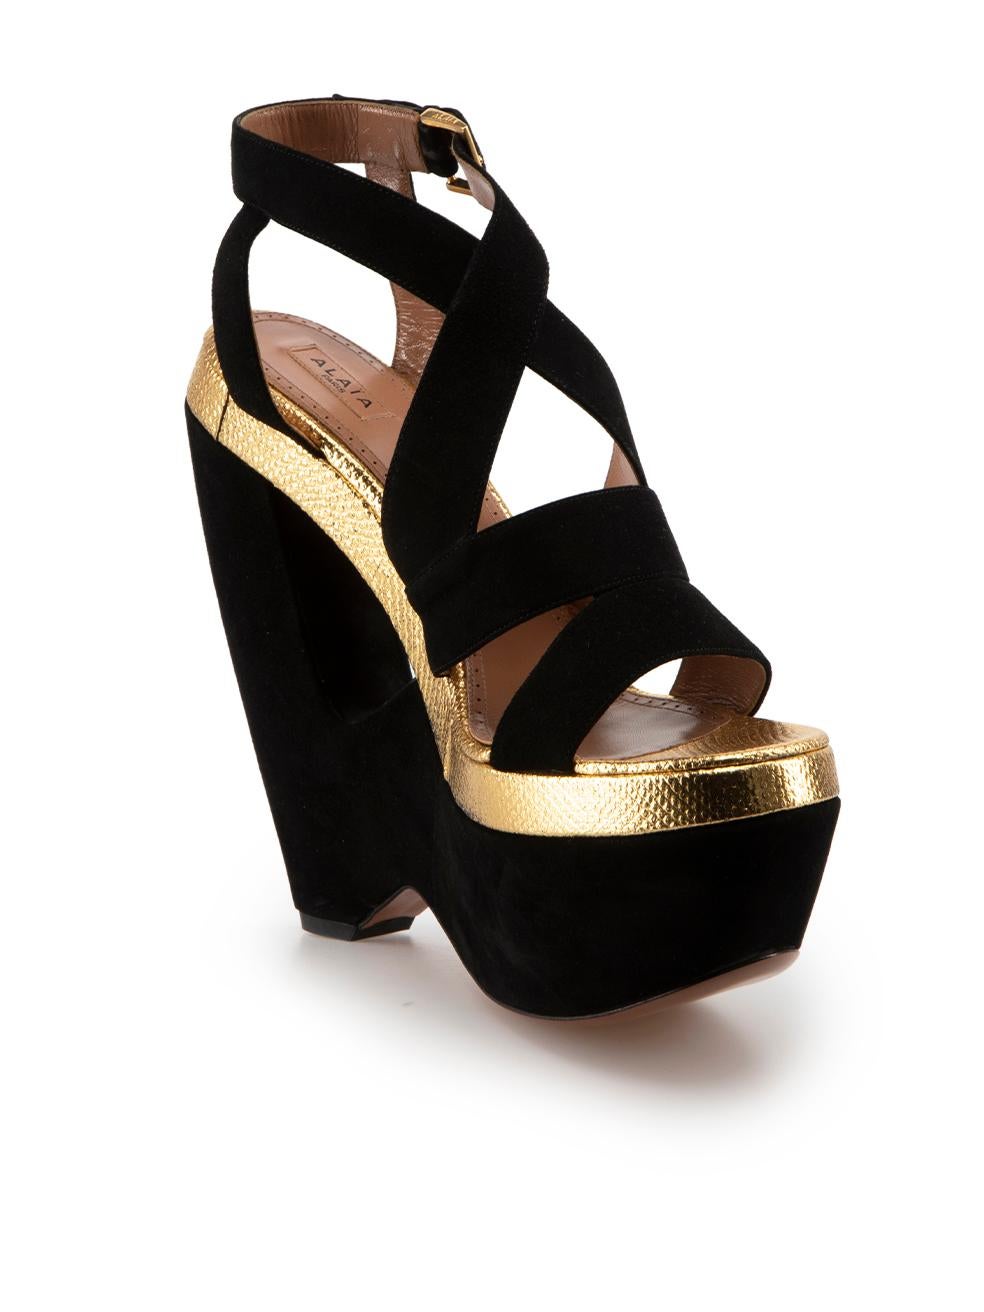 CONDITION is Never Worn. No visible wear to wedges is evident on this used Alaïa designer resale item. Comes in original box with dust bag.

Details
Black
Suede
Wedge sandals
Platform
Gold lizard skin detail
High heeled
Strappy
Cut out wedge
Open